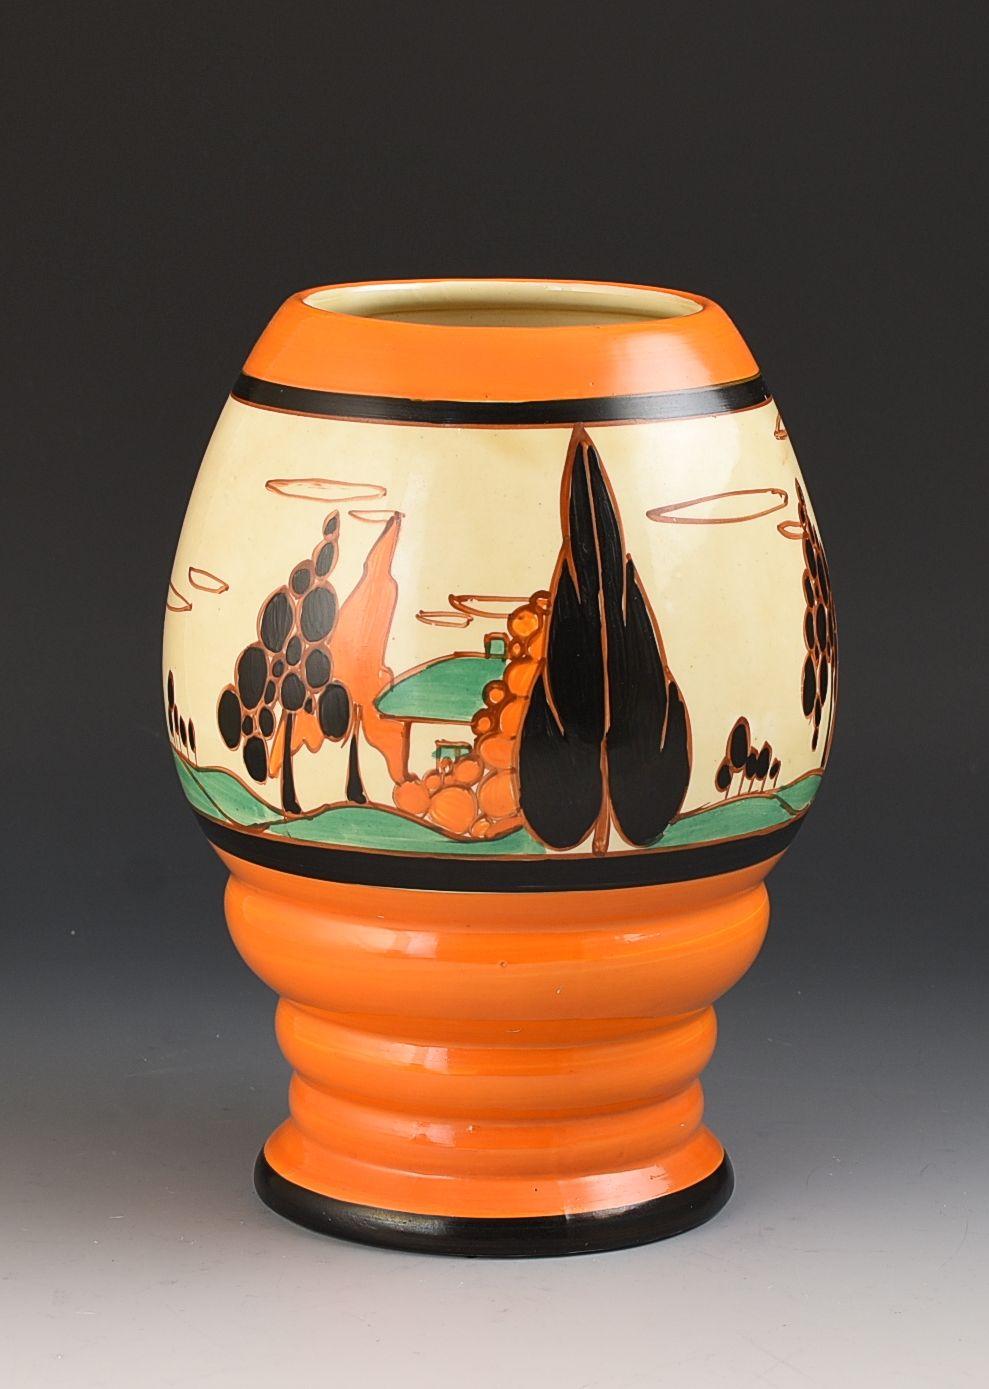 A superb 362 shape vase in an early bold version of Trees & House. This will date to 1931 and shows a perfectly painted repeating version of the pattern around the shape. The colours are clean and apart from a couple of minor scratches i can